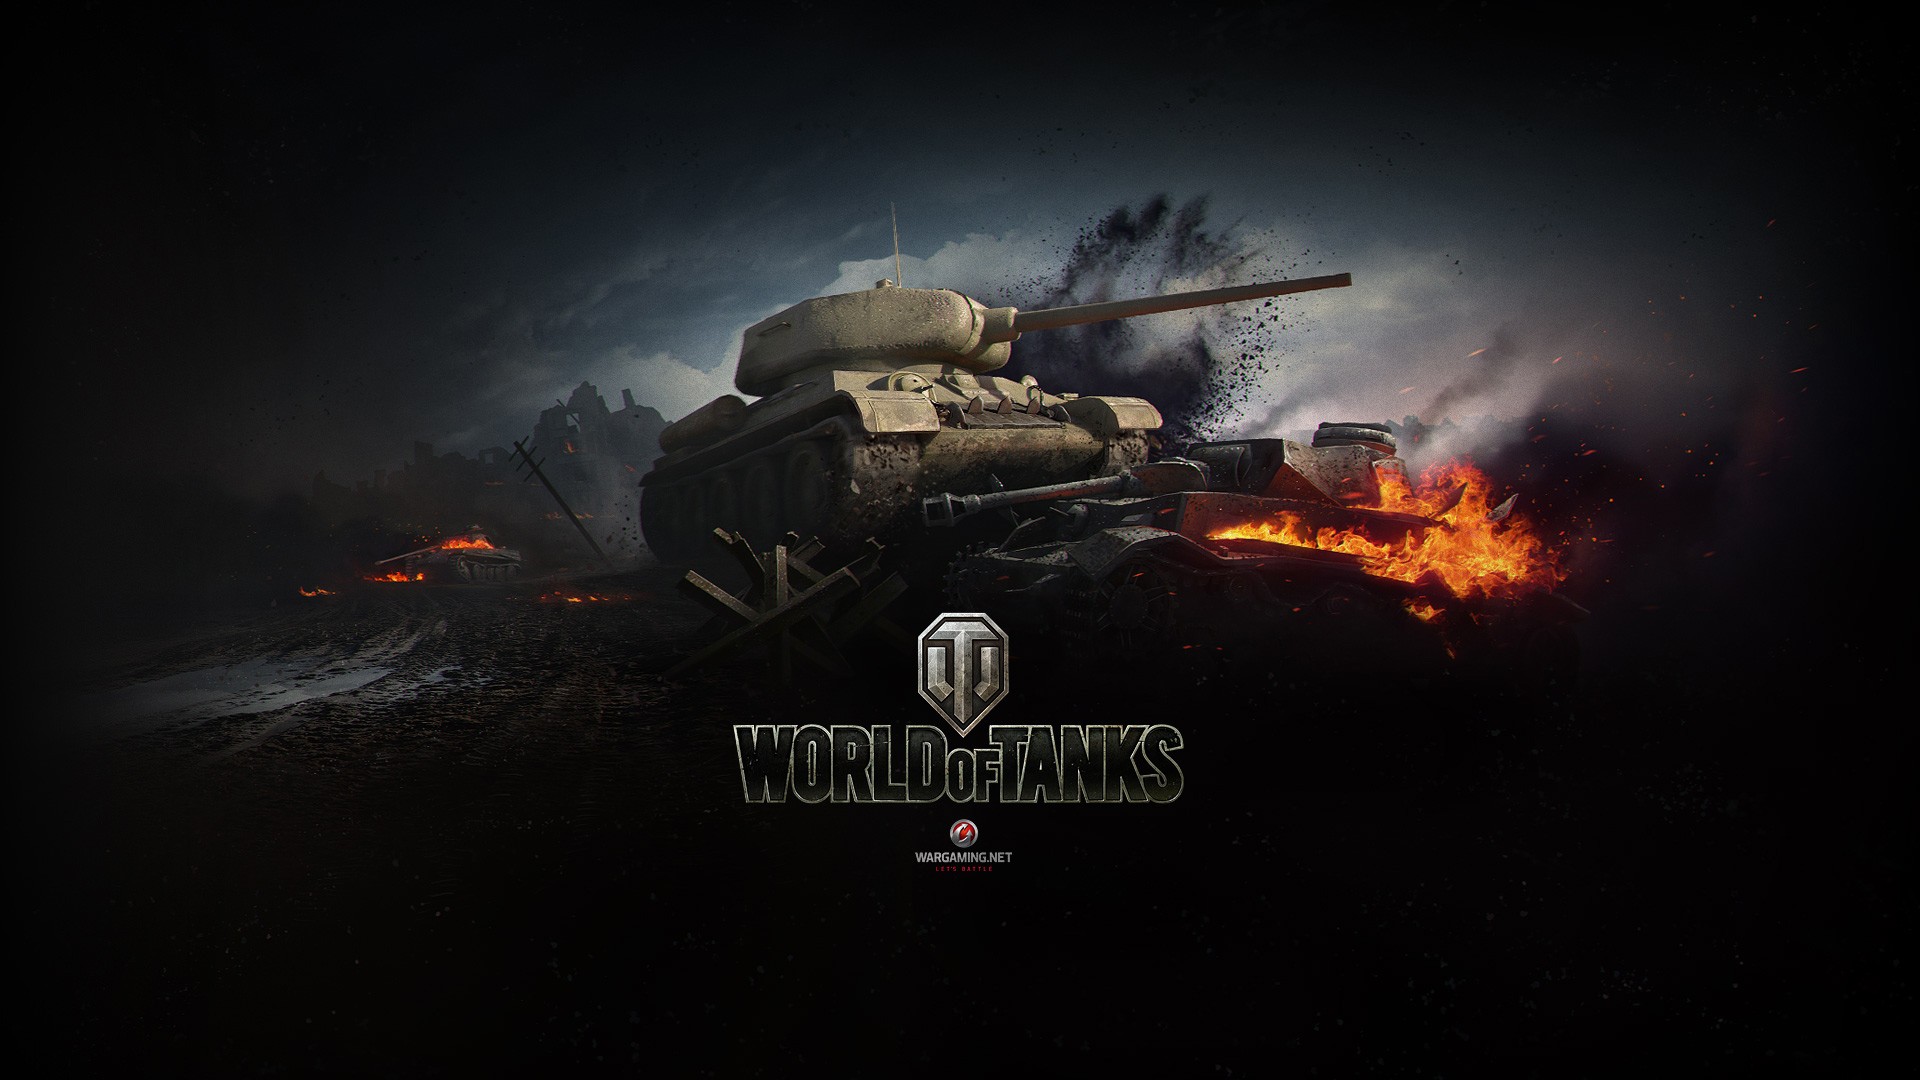 General 1920x1080 World of Tanks video games video game art tank military military vehicle vehicle PC gaming